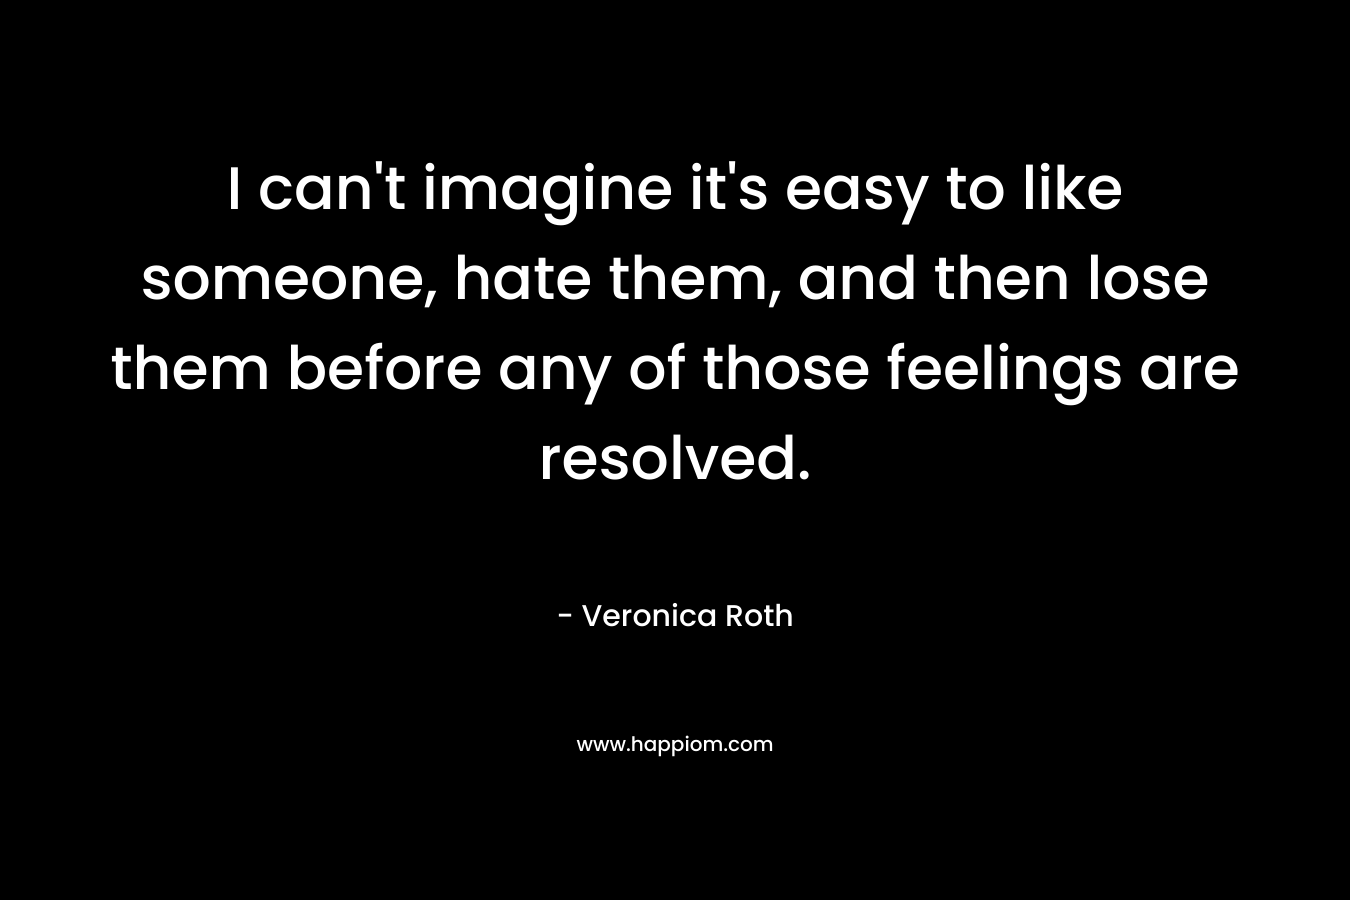 I can't imagine it's easy to like someone, hate them, and then lose them before any of those feelings are resolved.